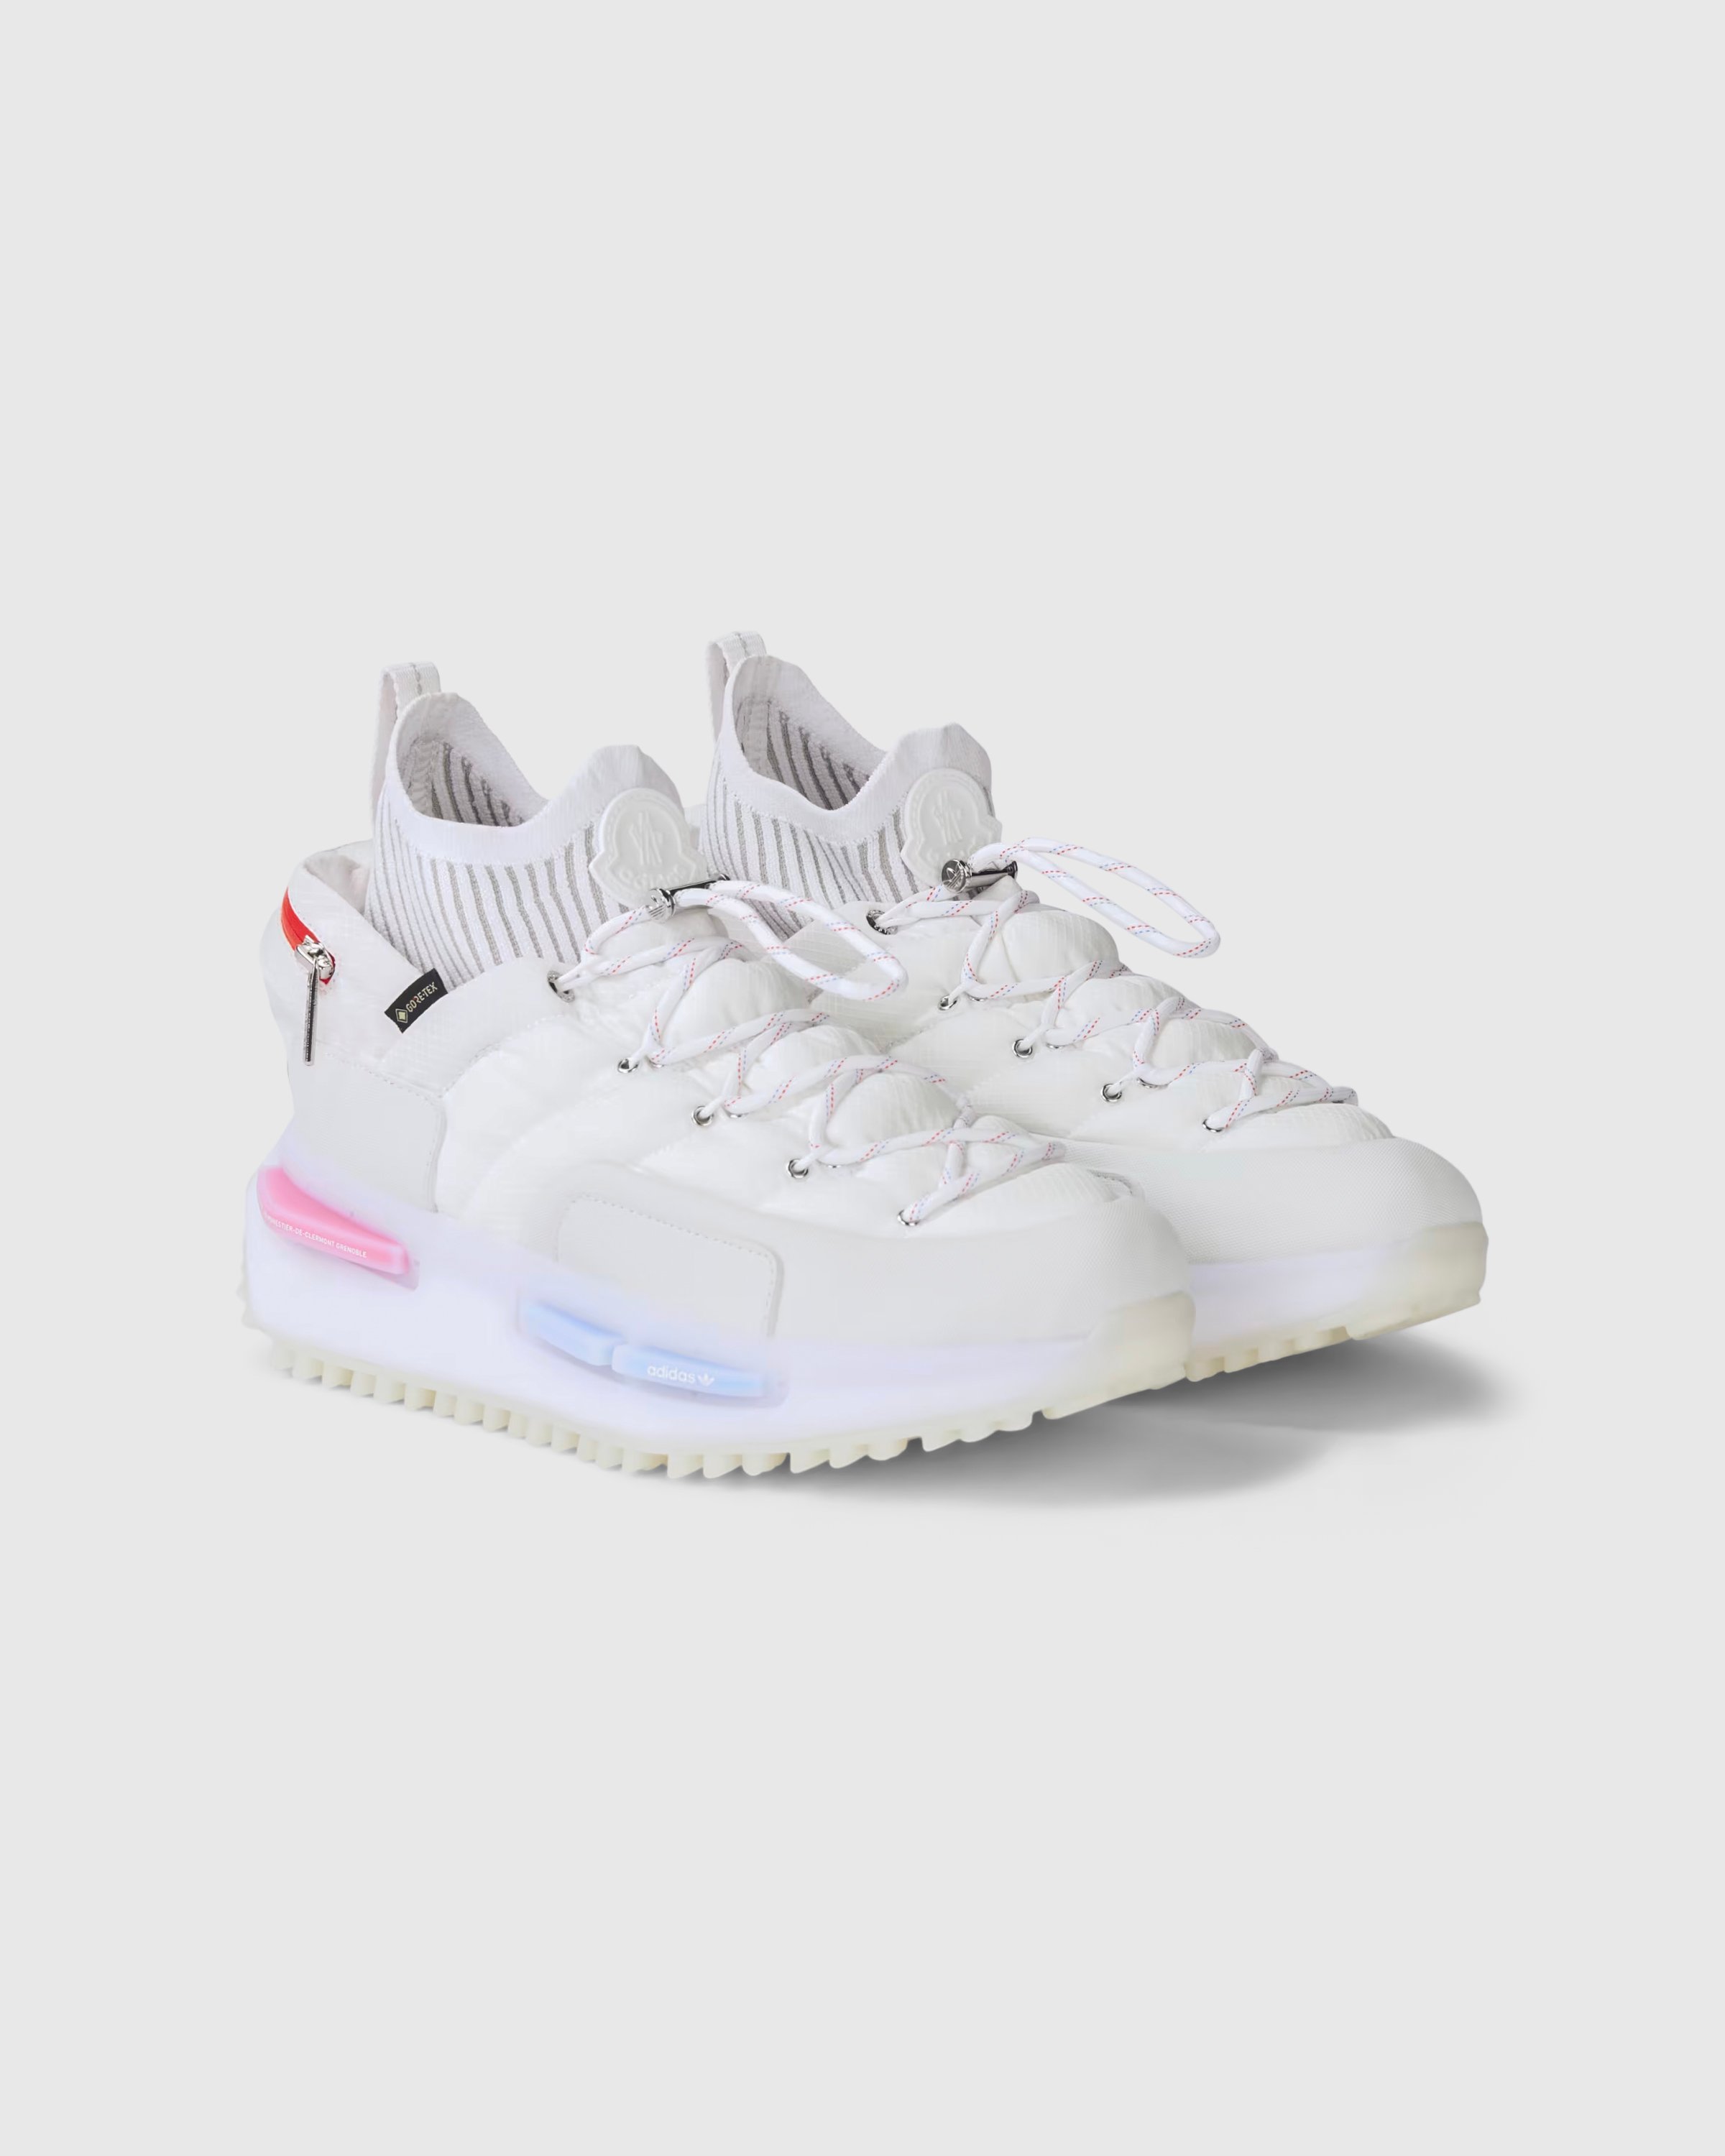 Moncler x adidas Originals - NMD Runner Mid Core White - Footwear - White - Image 2